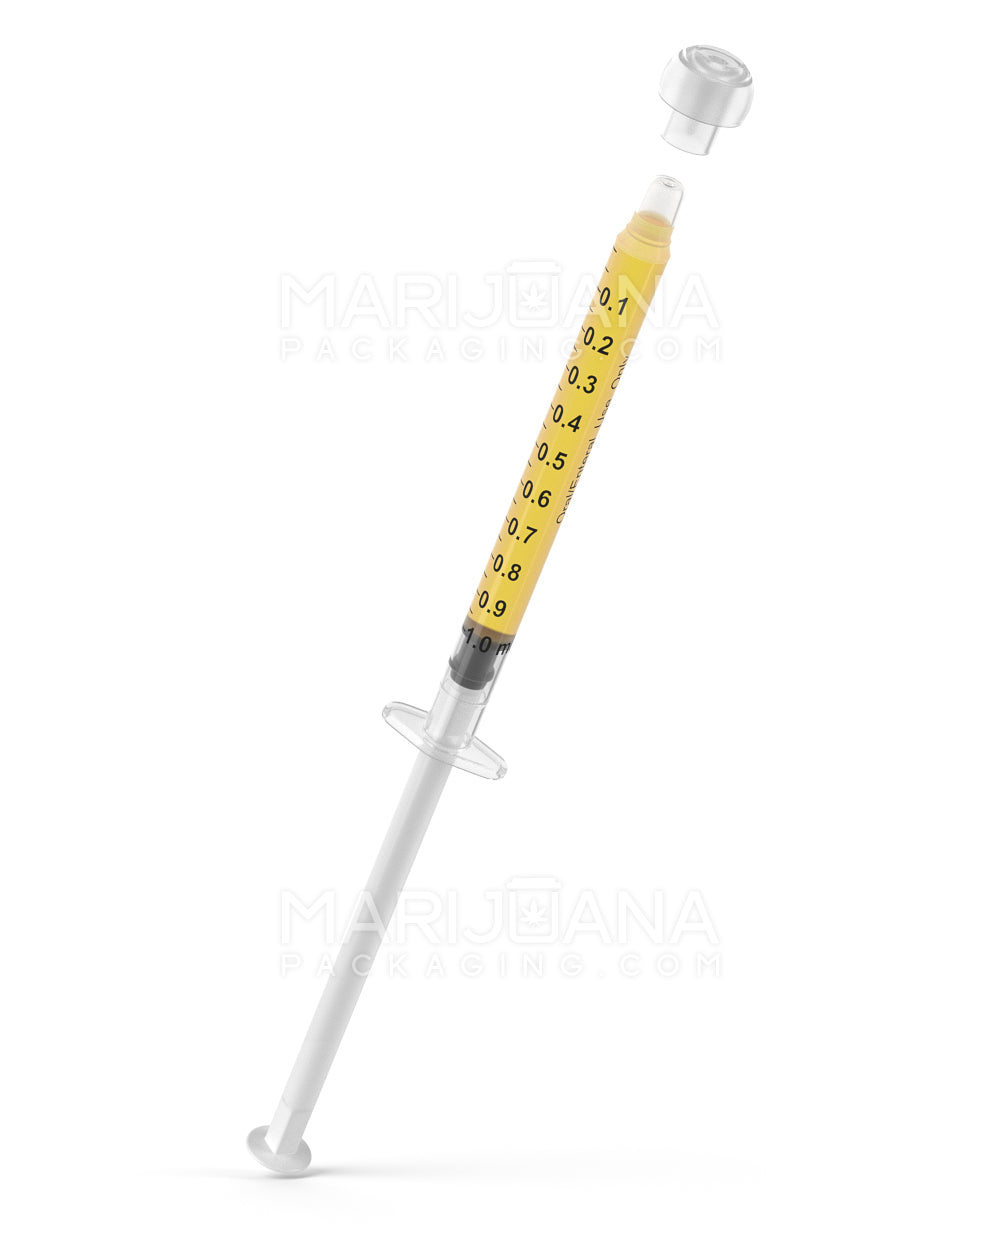 Plastic Oral Concentrate Syringes | 1mL - 0.1mL Increments - 100 Count - 6